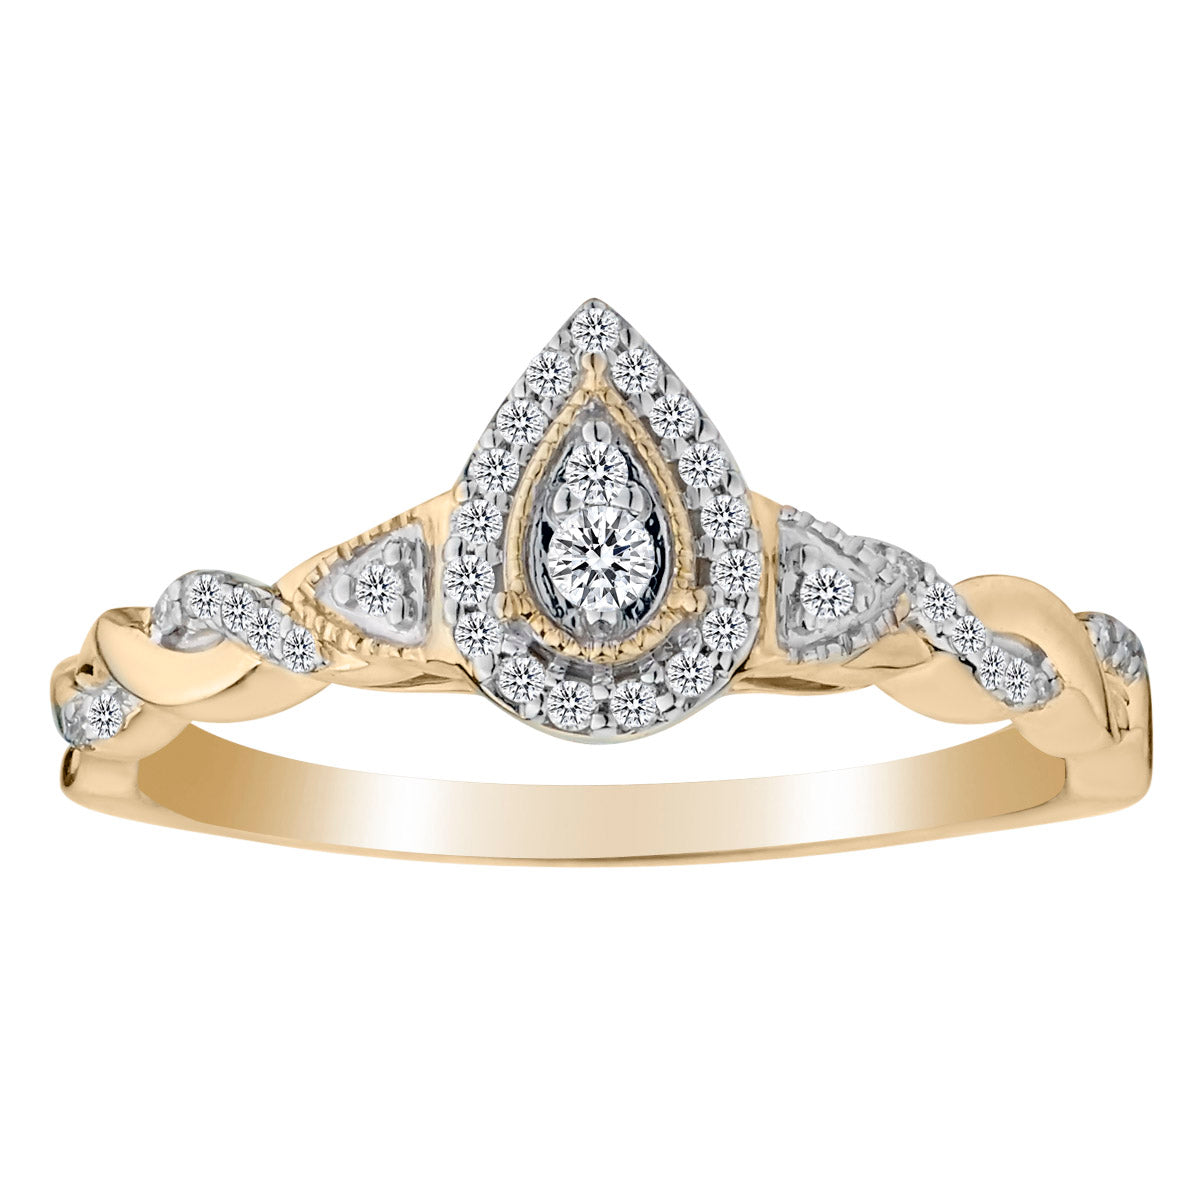 .15 Carat Pear Shape "Infinity" Diamond Ring, 10kt Yellow Gold. Griffin Jewellery Designs